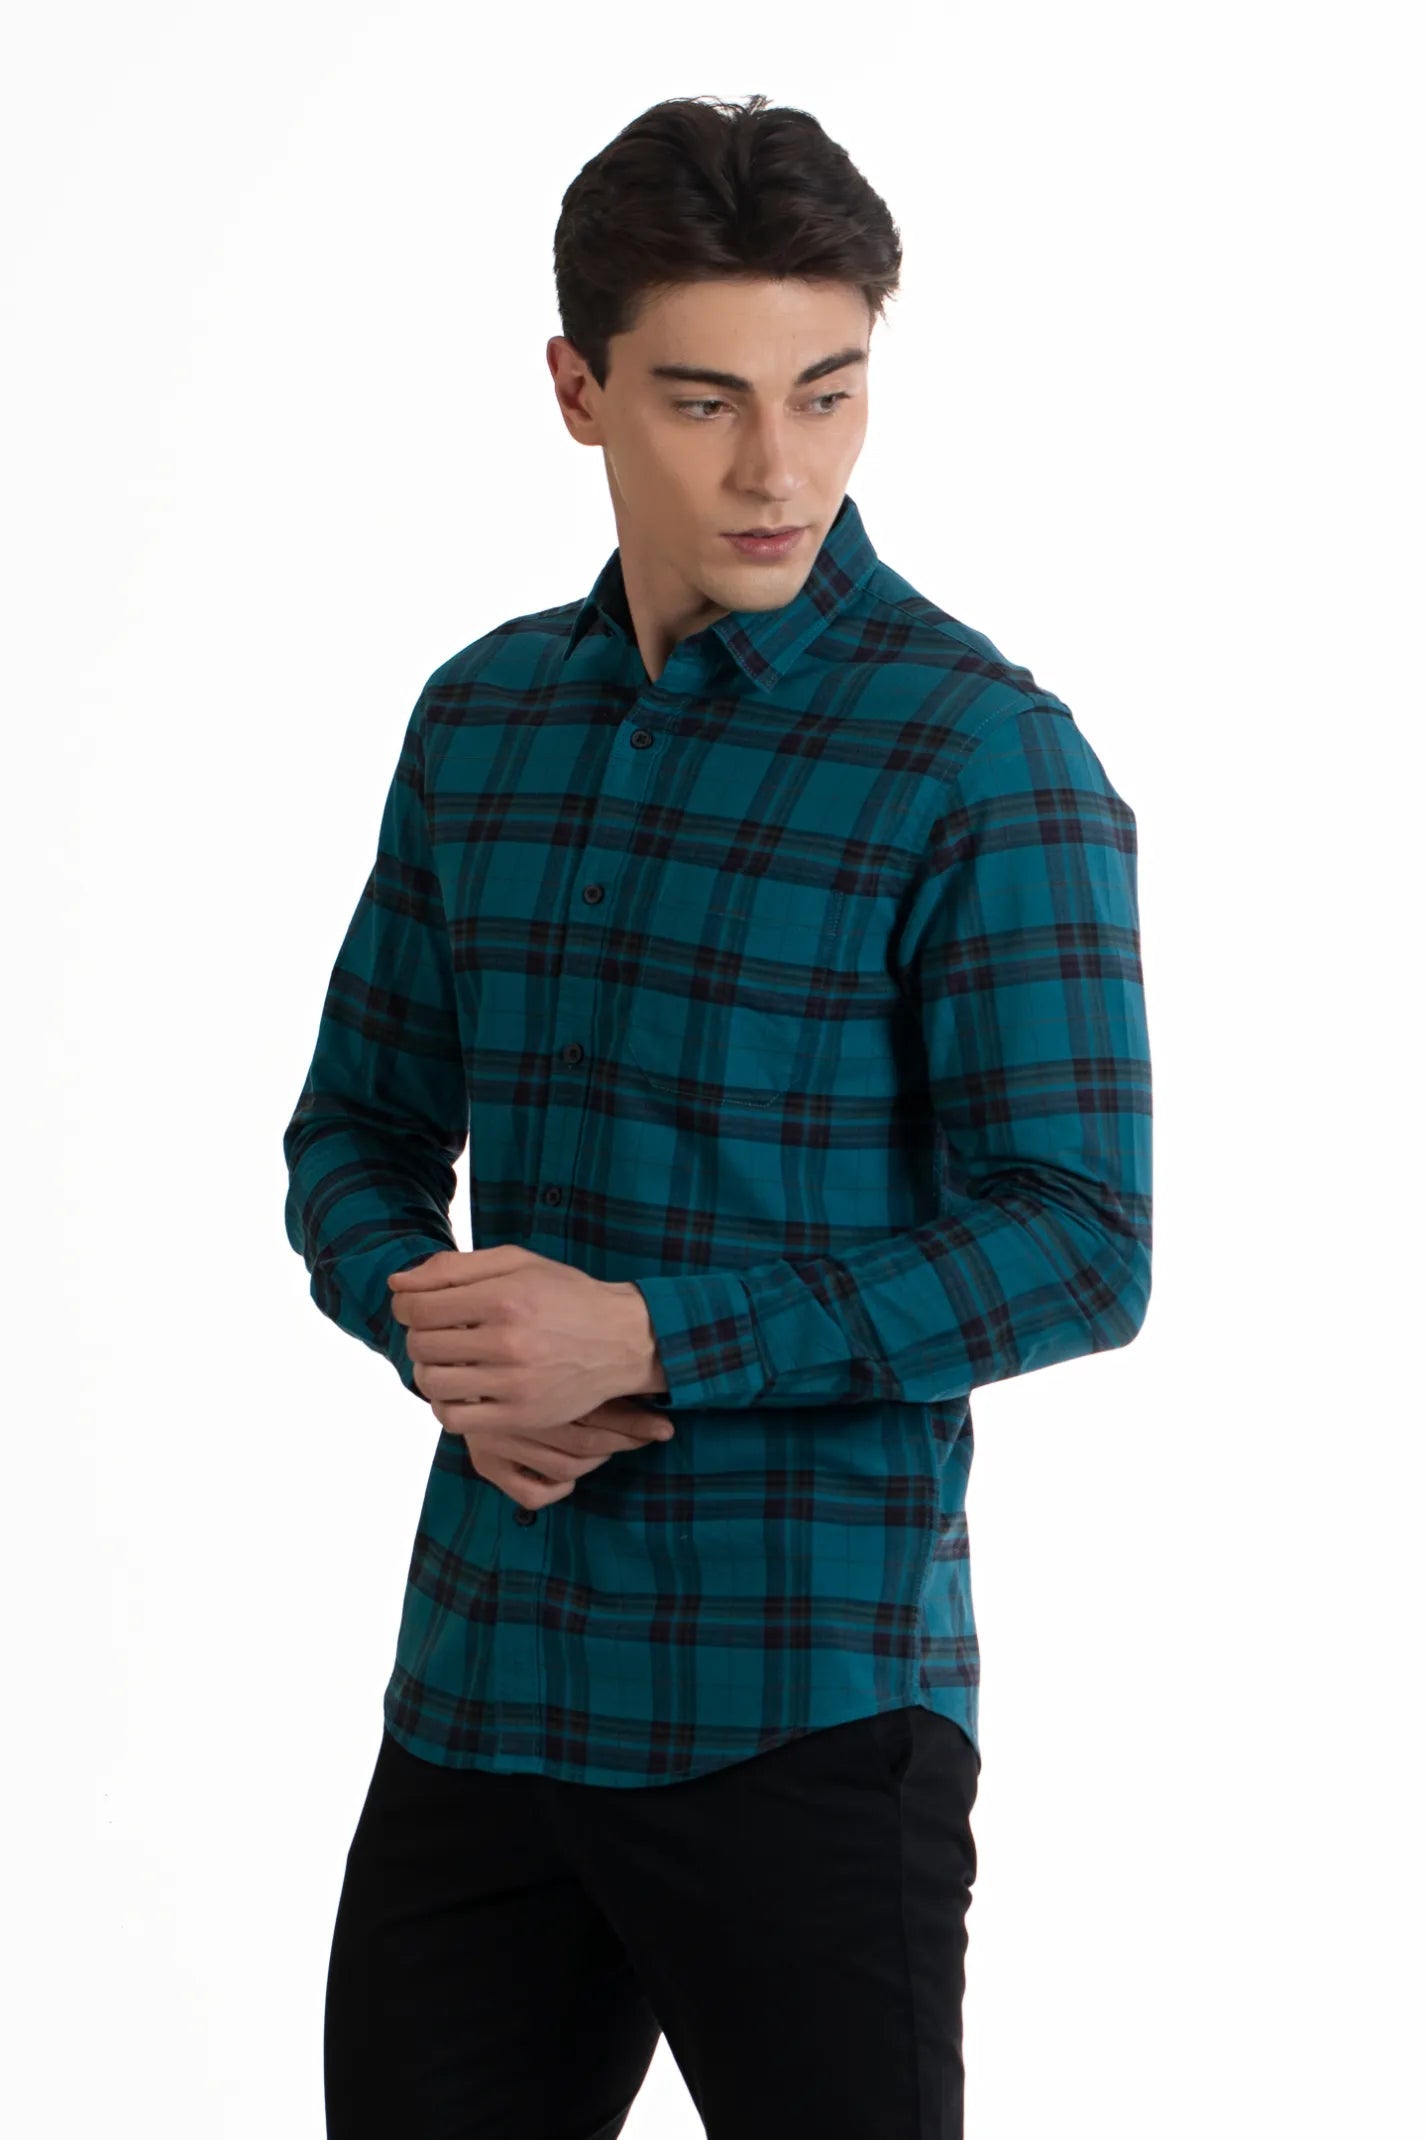 Buy Flannel Oxford Shirts Online.